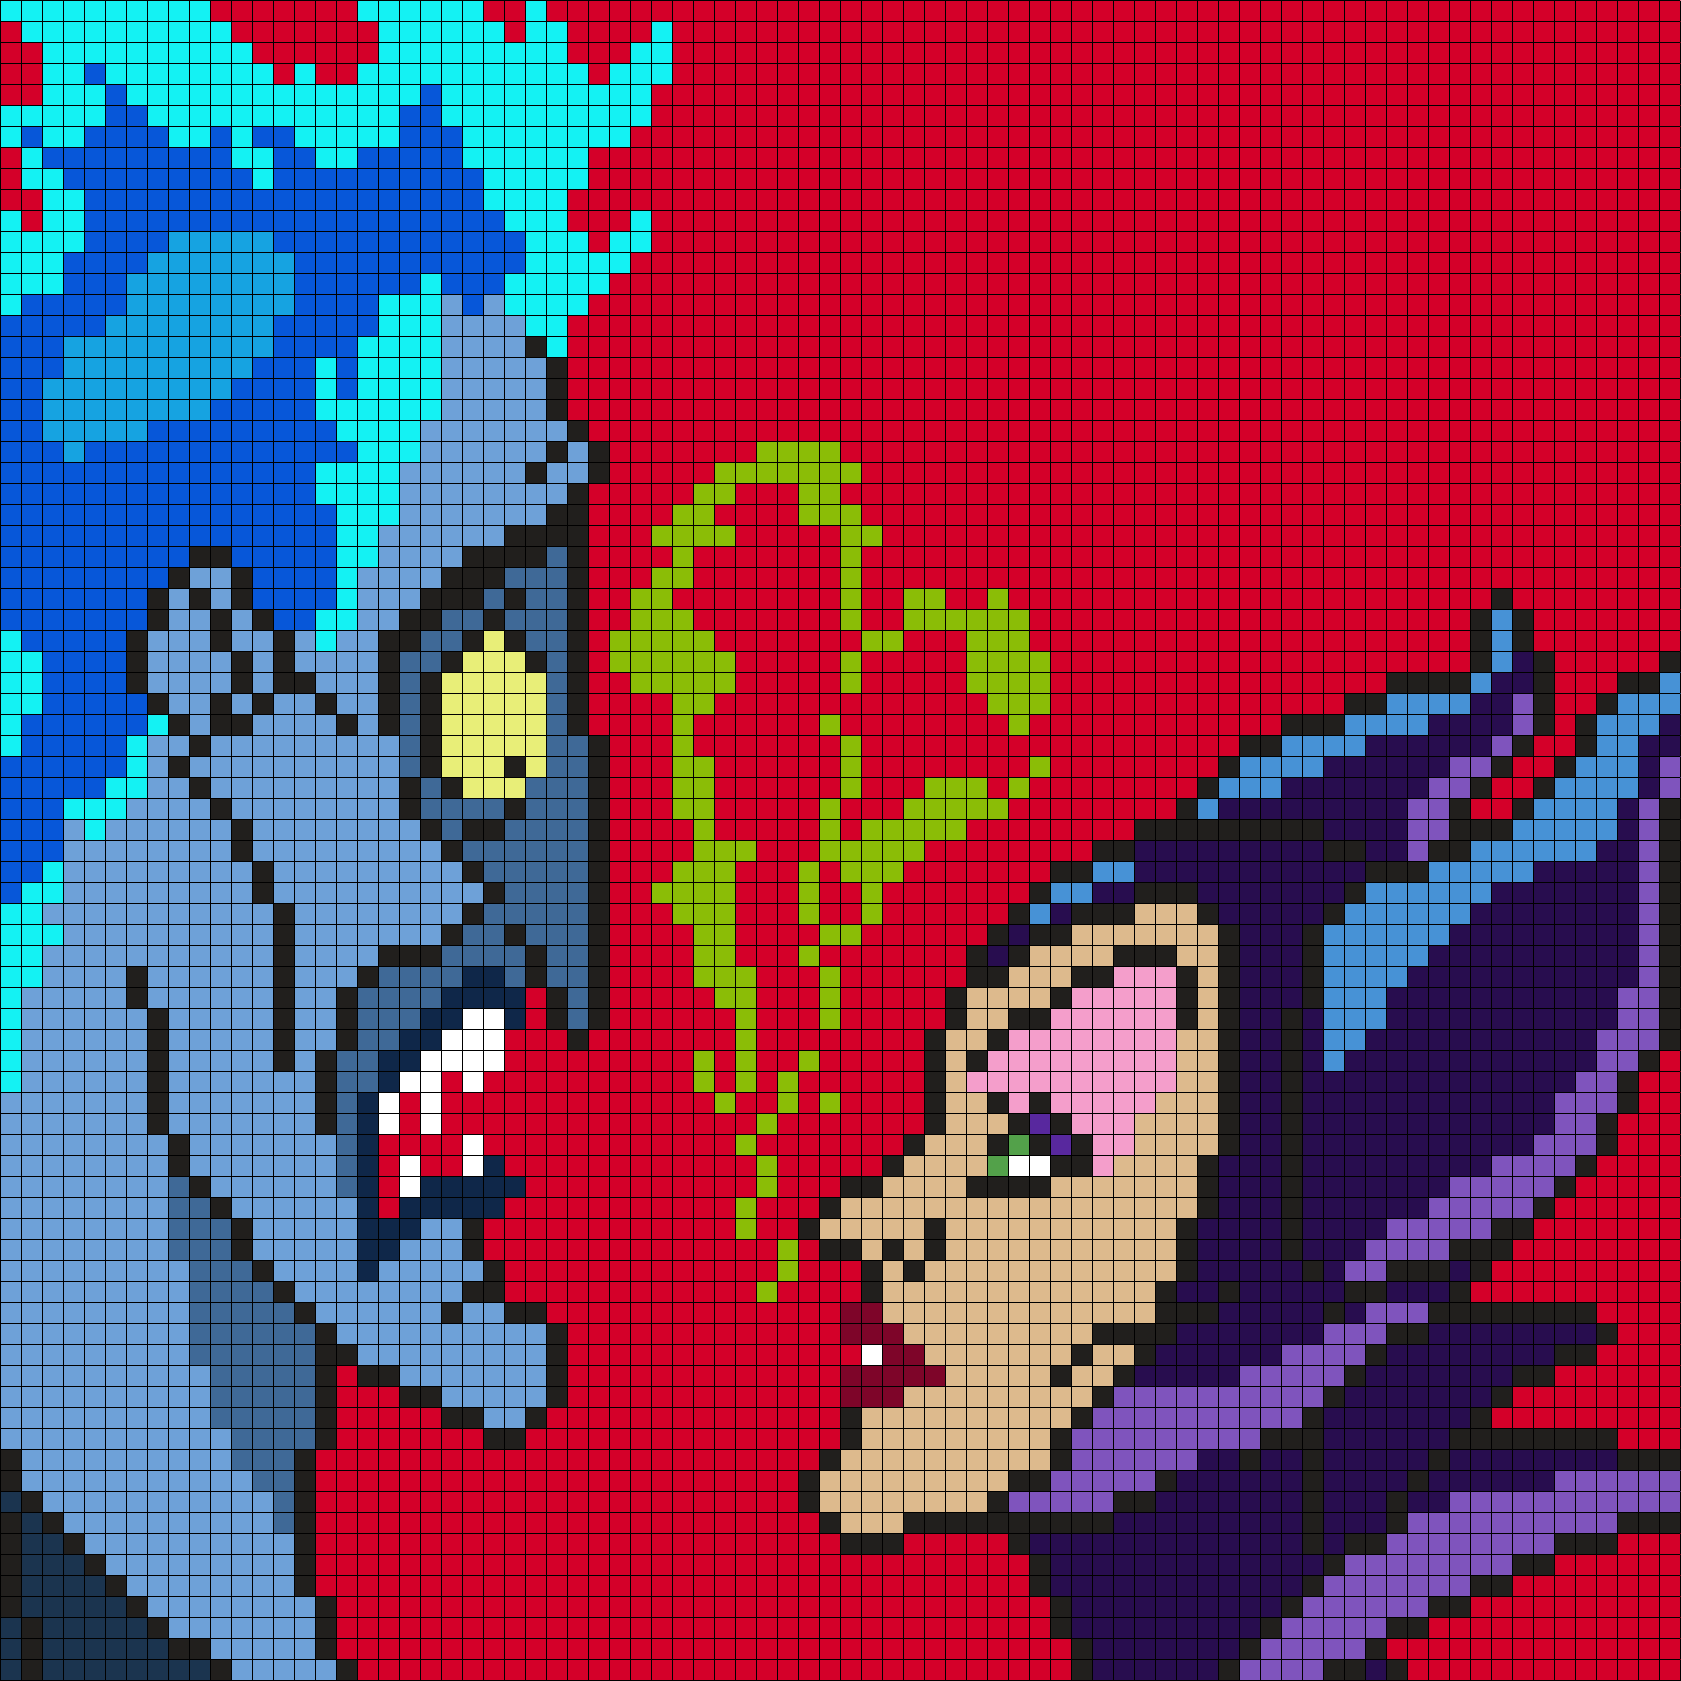 Hades And Maleficent (Square)